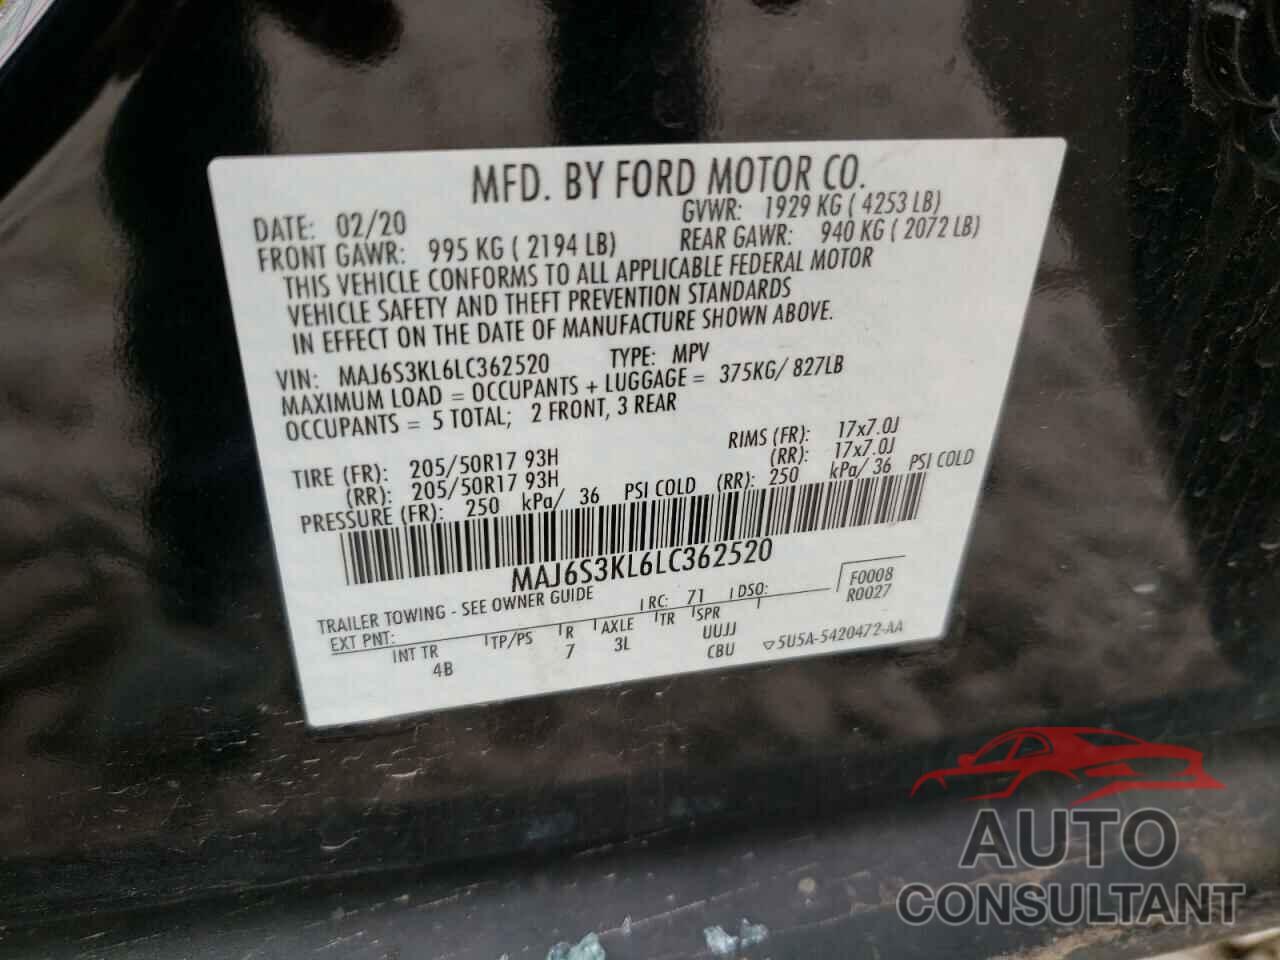 FORD ALL OTHER 2020 - MAJ6S3KL6LC362520